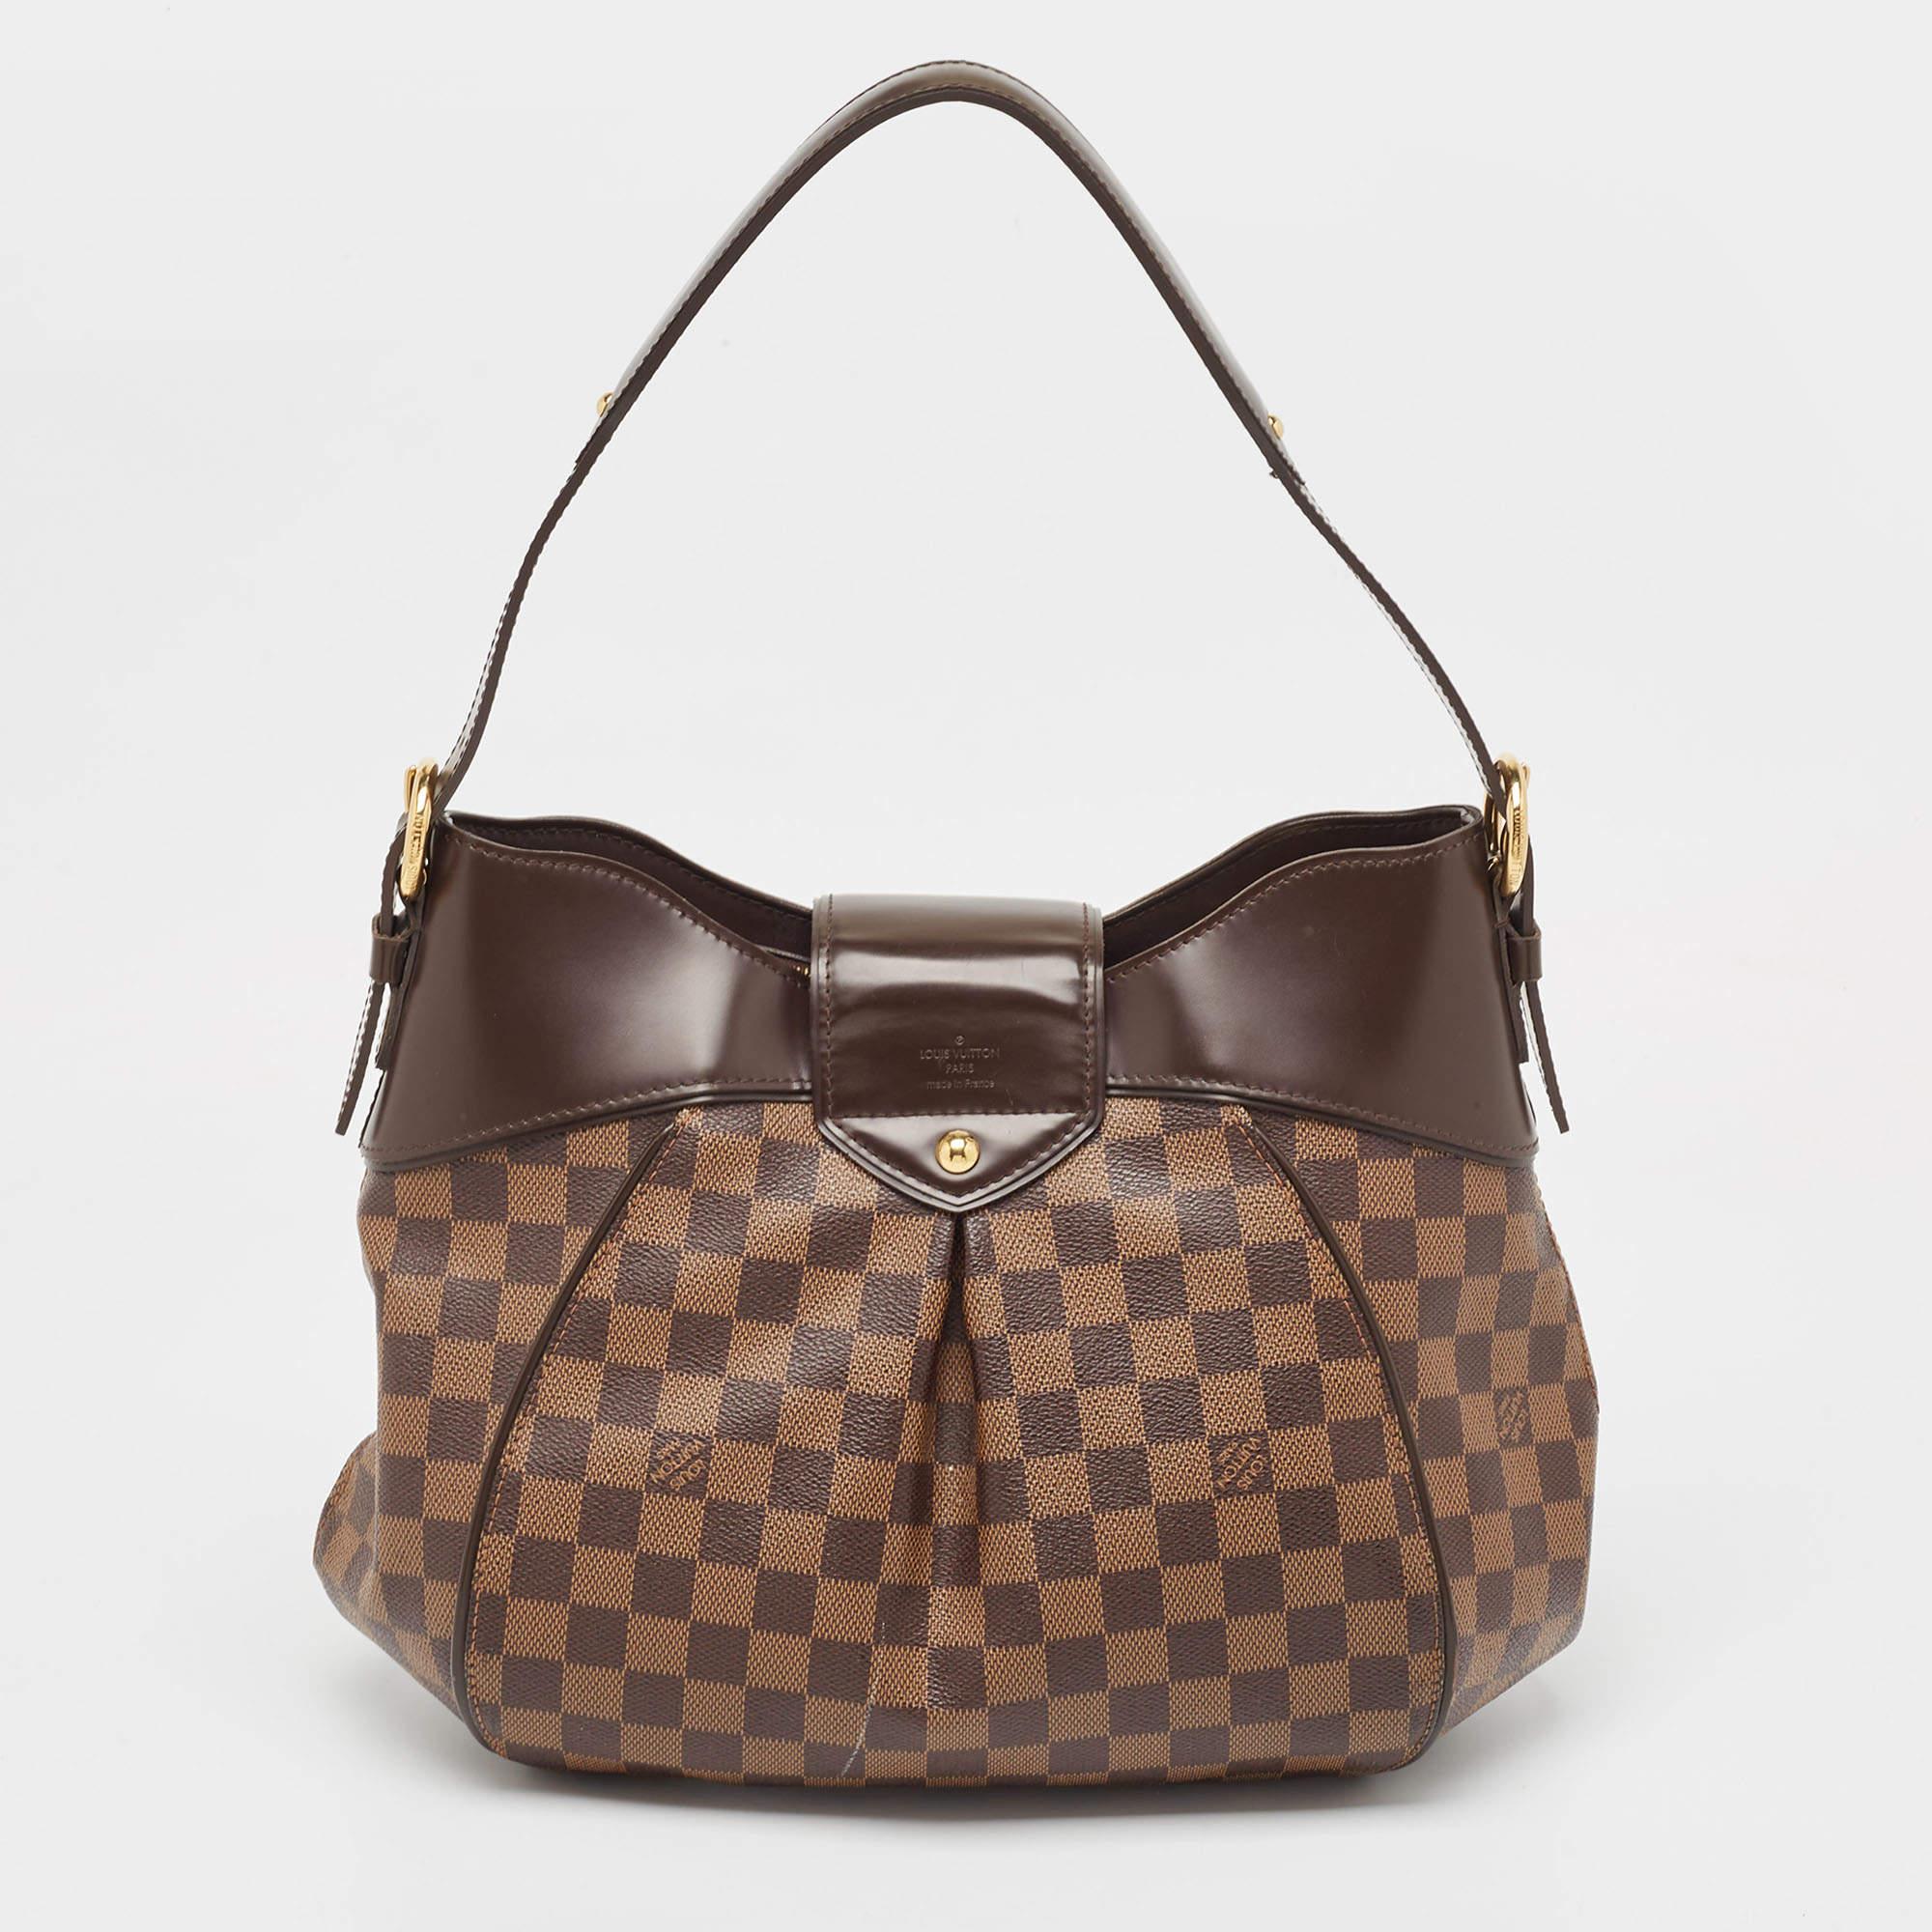 Louis Vuitton's handbags are popular thanks to their high style, durability, and functionality. This Sistina bag, like all the other designs, is lasting and stylish. Crafted from Damier Ebene canvas, the bag can be paraded using the top handles. It